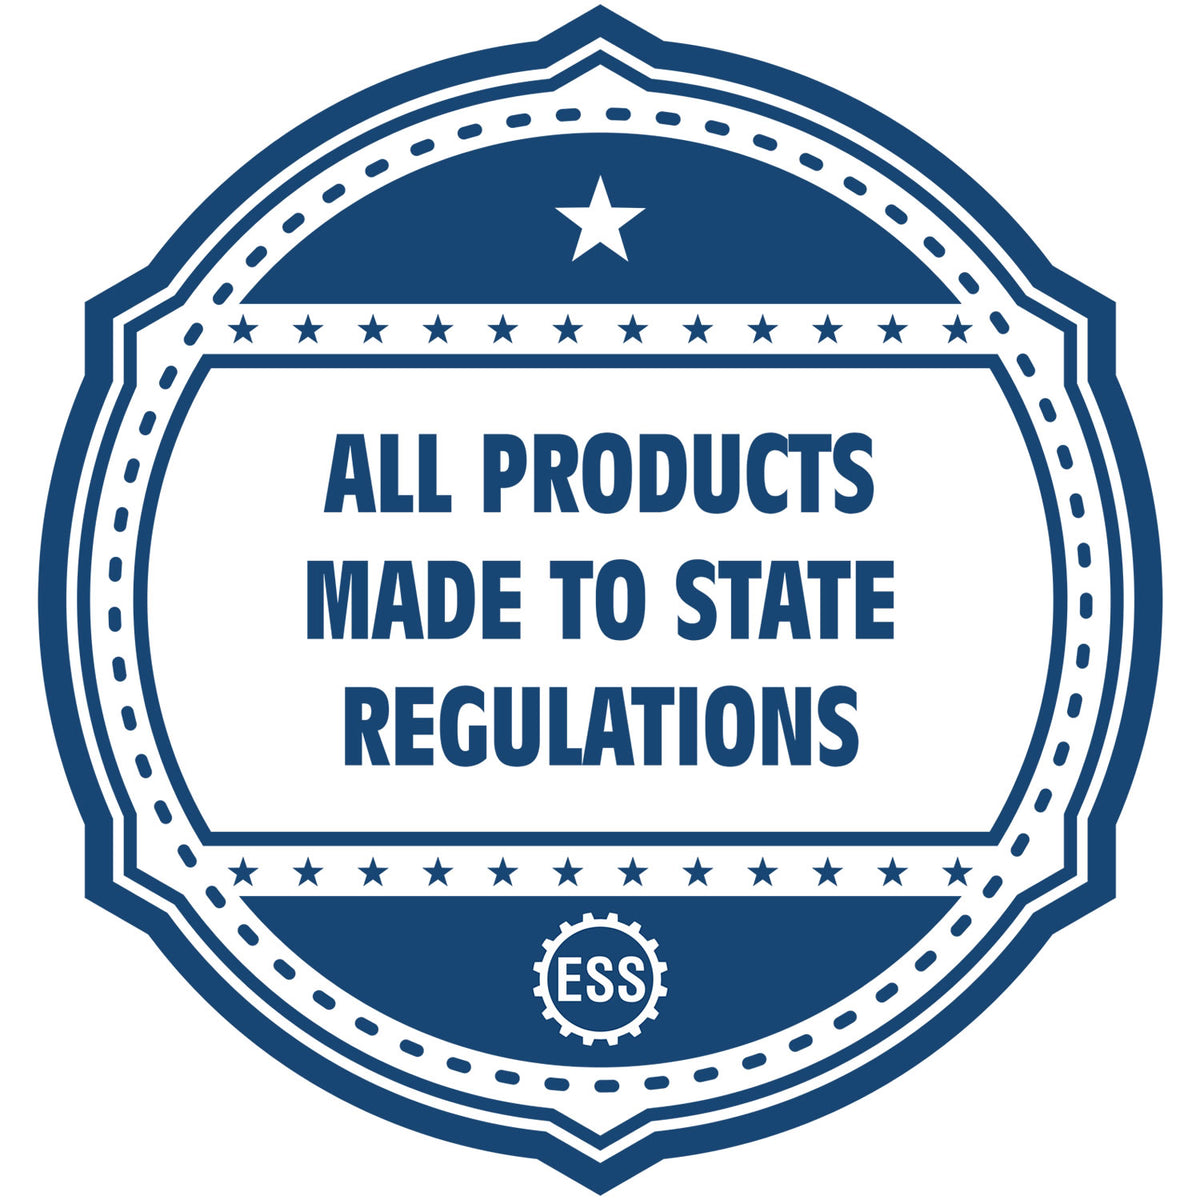 A blue icon or badge for the Gift Rhode Island Landscape Architect Seal showing that this product is made in compliance with state regulations.